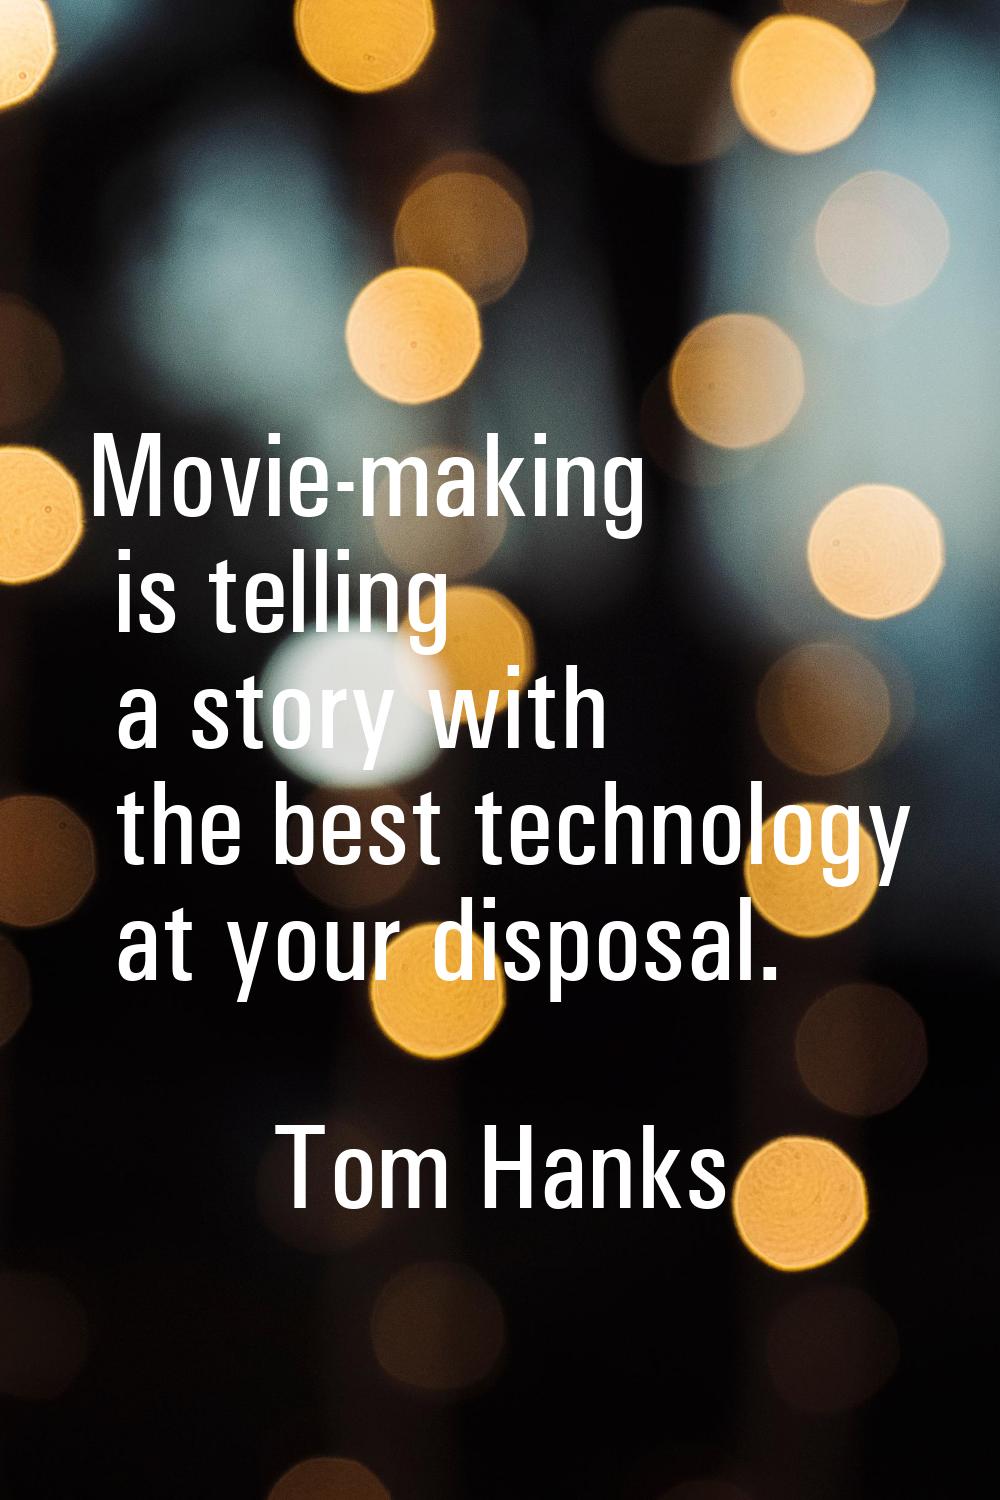 Movie-making is telling a story with the best technology at your disposal.